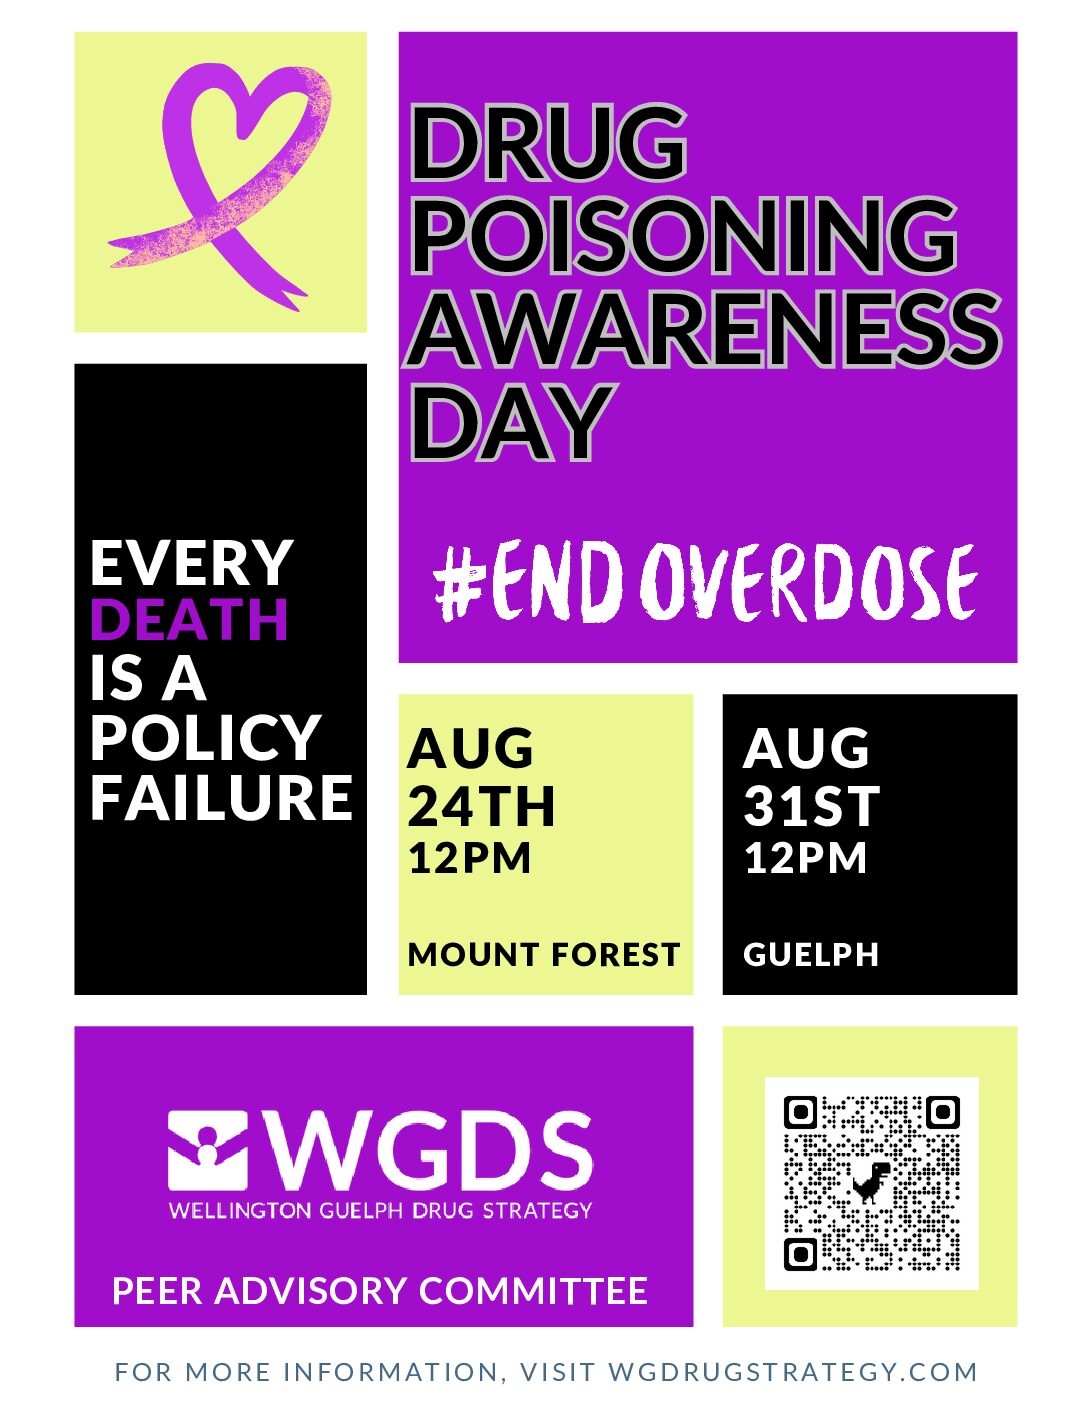 There will be an event in Mount Forest to honour International Overdose Awareness Day/Drug Poisoning Awareness Day next month